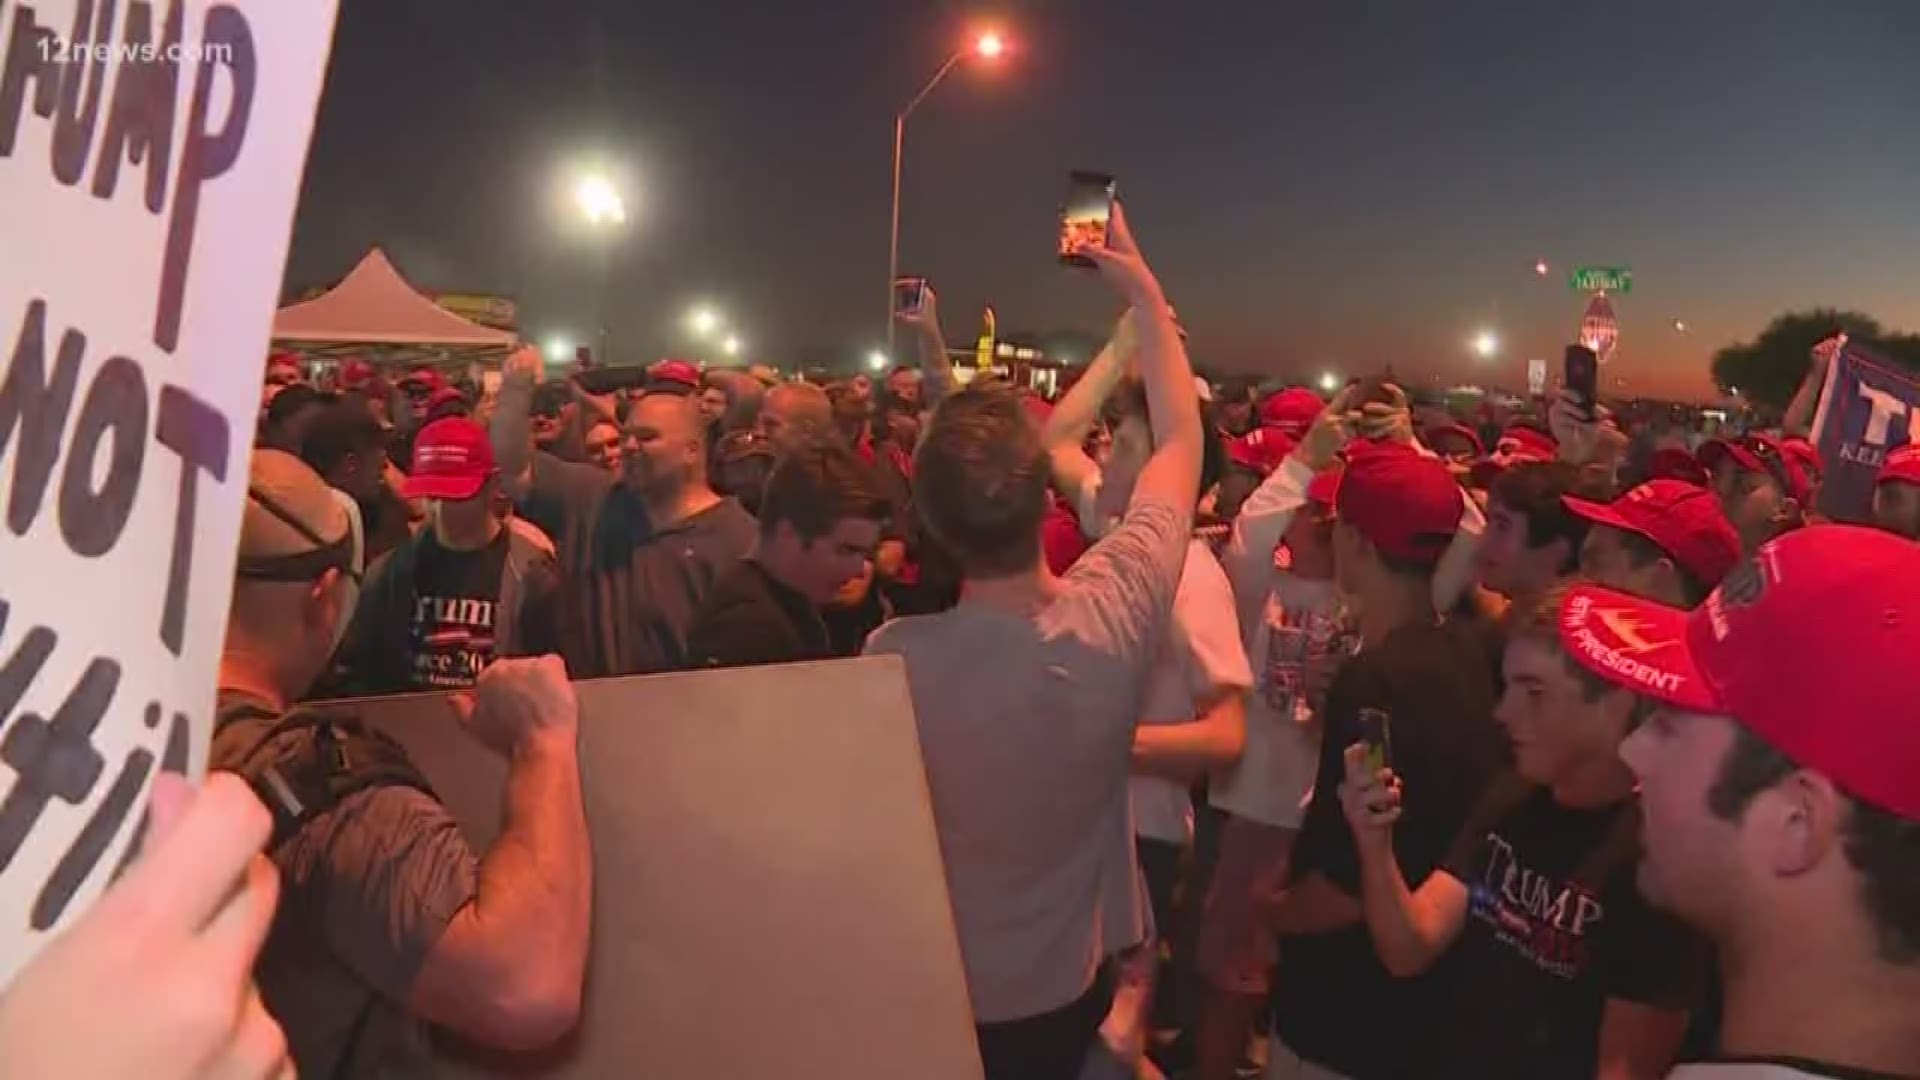 While protesters and rally attendees shared some tense moments, the scene for Trump's Phoenix visit was nothing compared to his last Phoenix rally in August 2017.